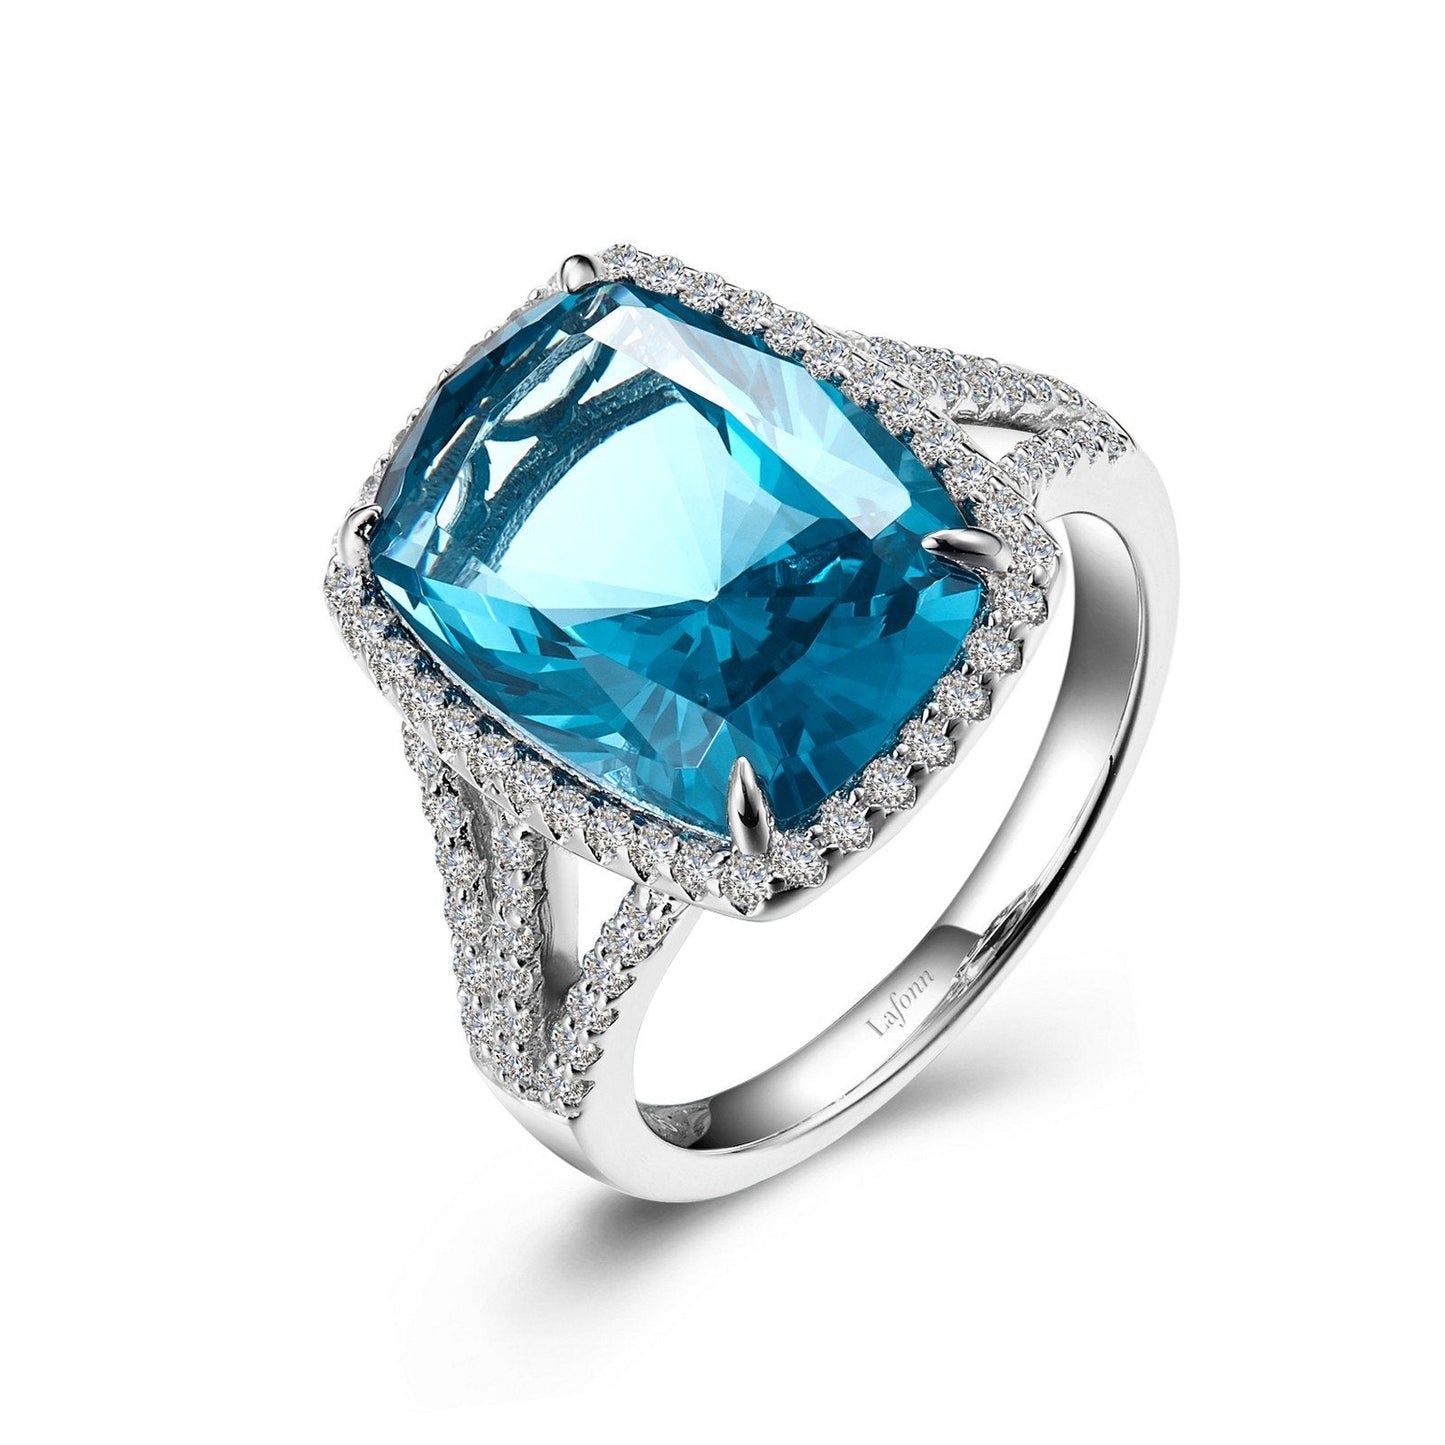 Load image into Gallery viewer, Lafonn Cushion-Cut Halo Engagement Ring Paraiba Tourmaline RINGS Size 6 Platinum 10.26 CTS Approx.16.7(H)*12.8(W)
